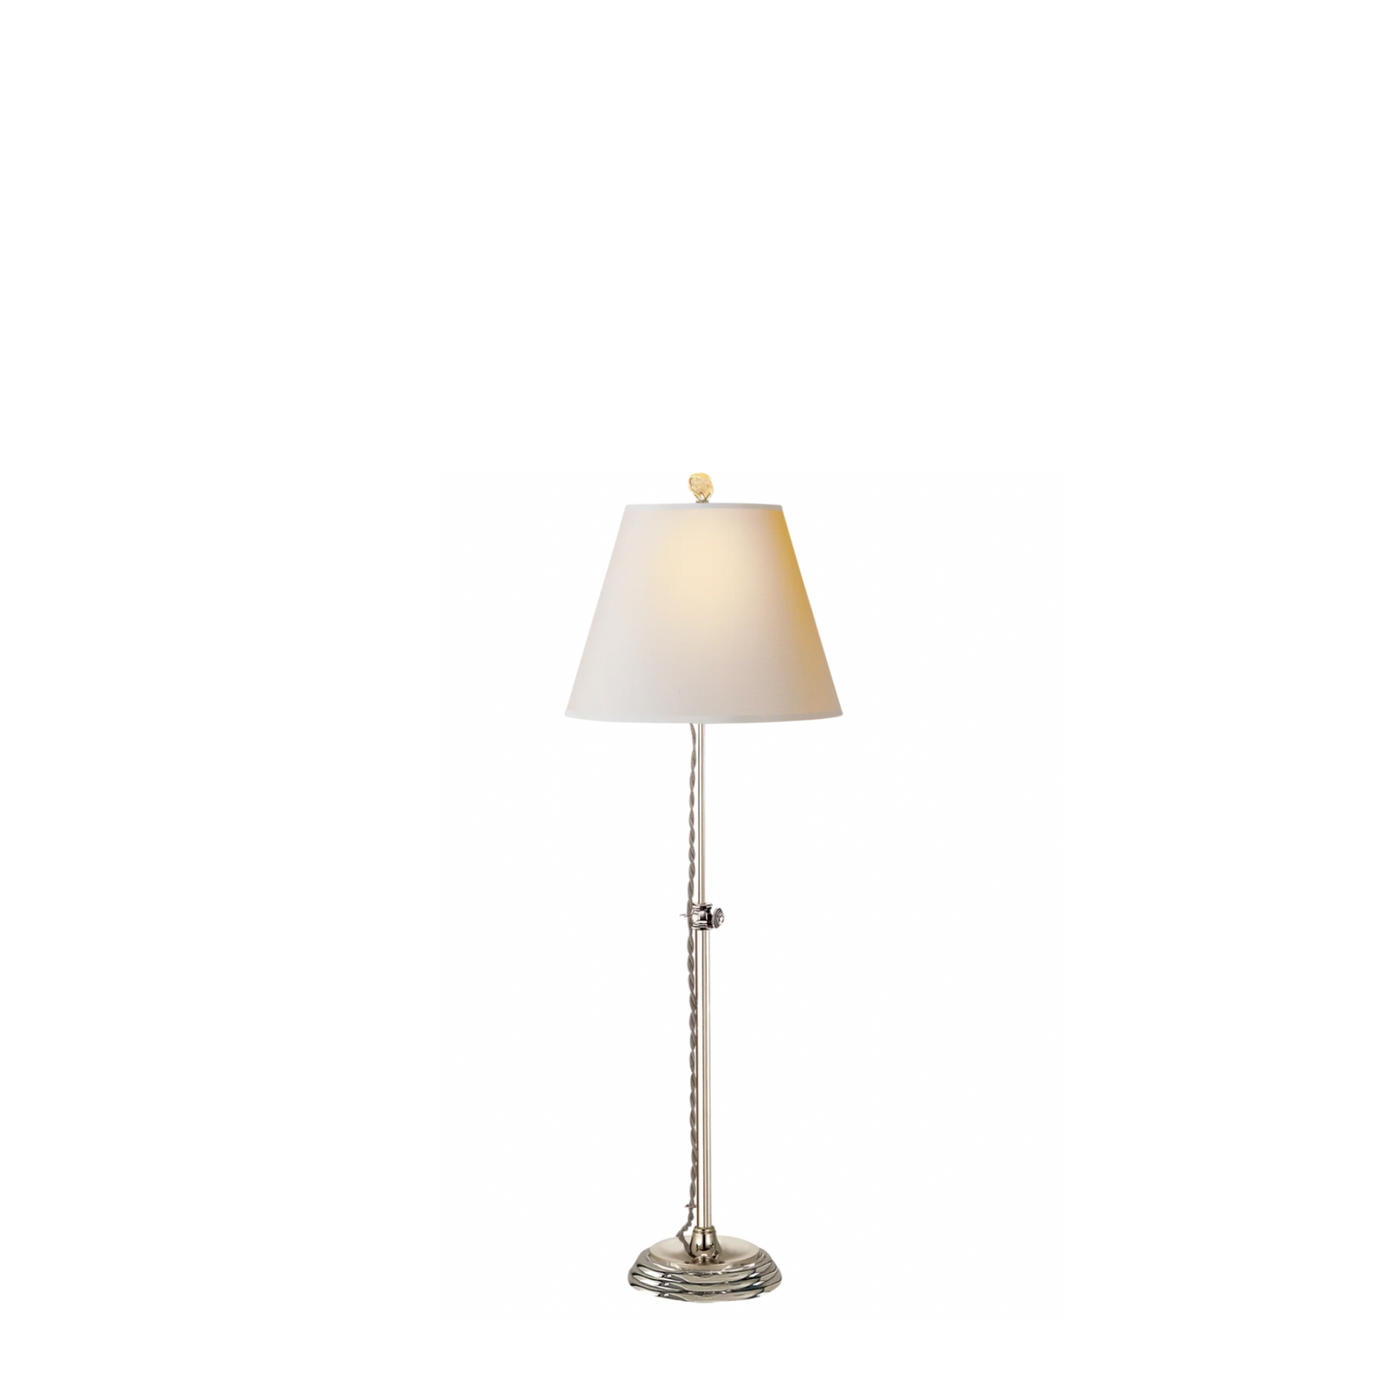 Wyatt Adjustable Table Lamp with Exposed Cord | Newport Lamp And Shade | Located in Newport, RI